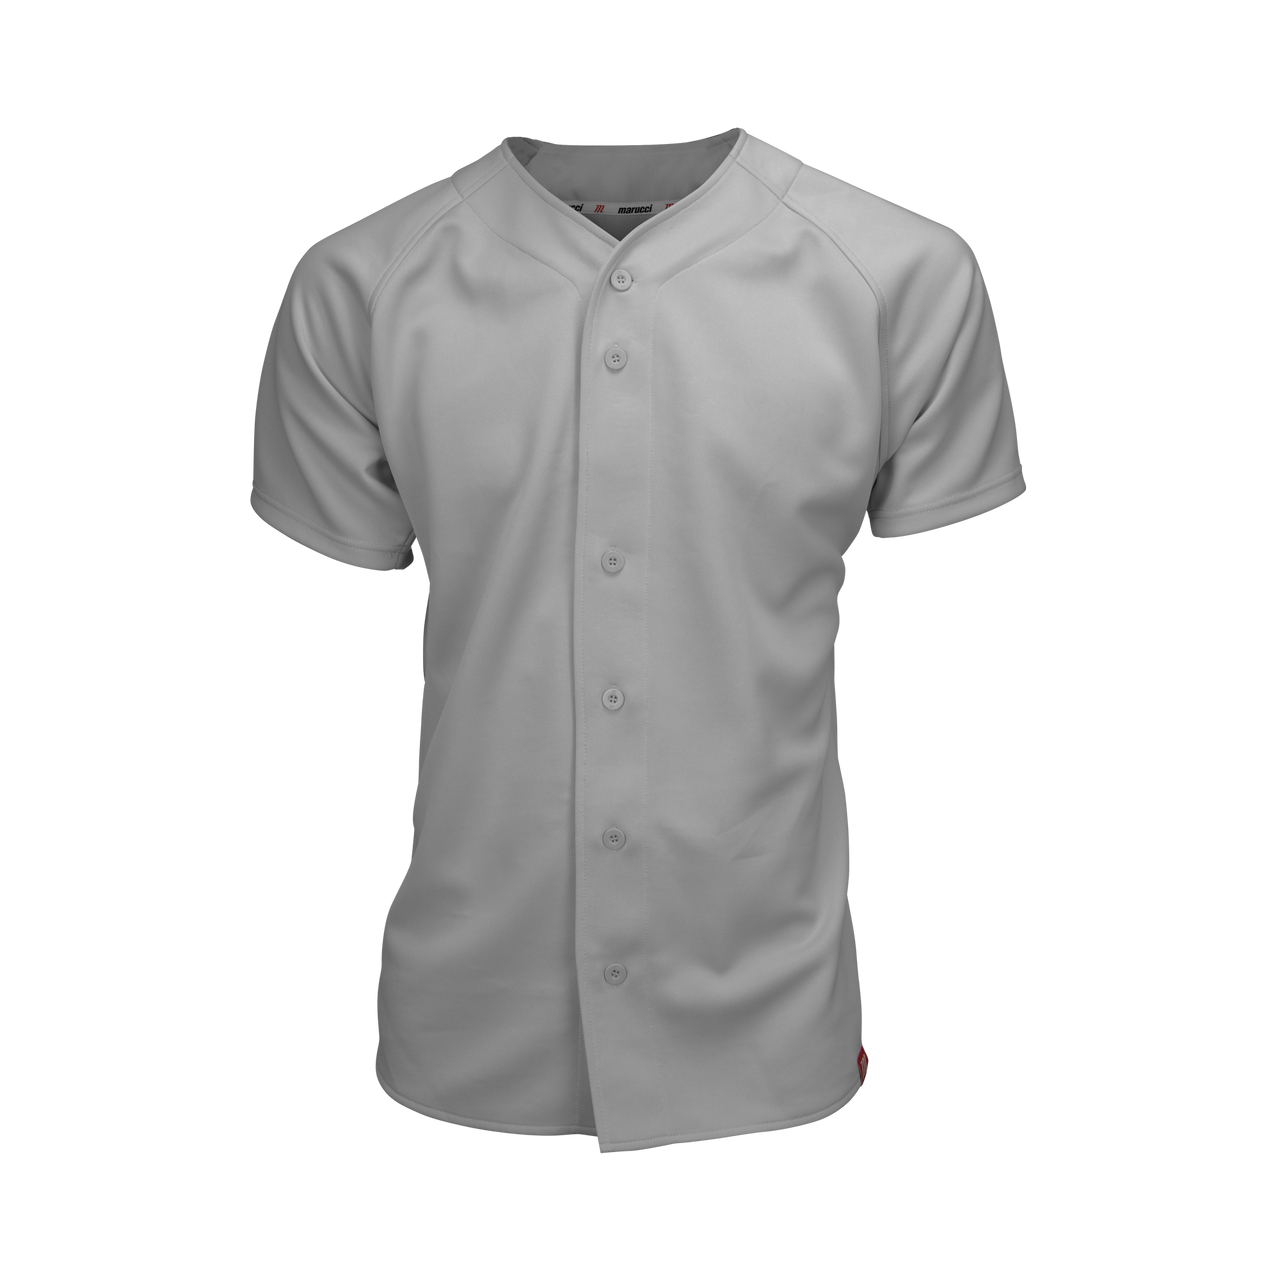 Marucci Youth Full Button Jersey Gray Small